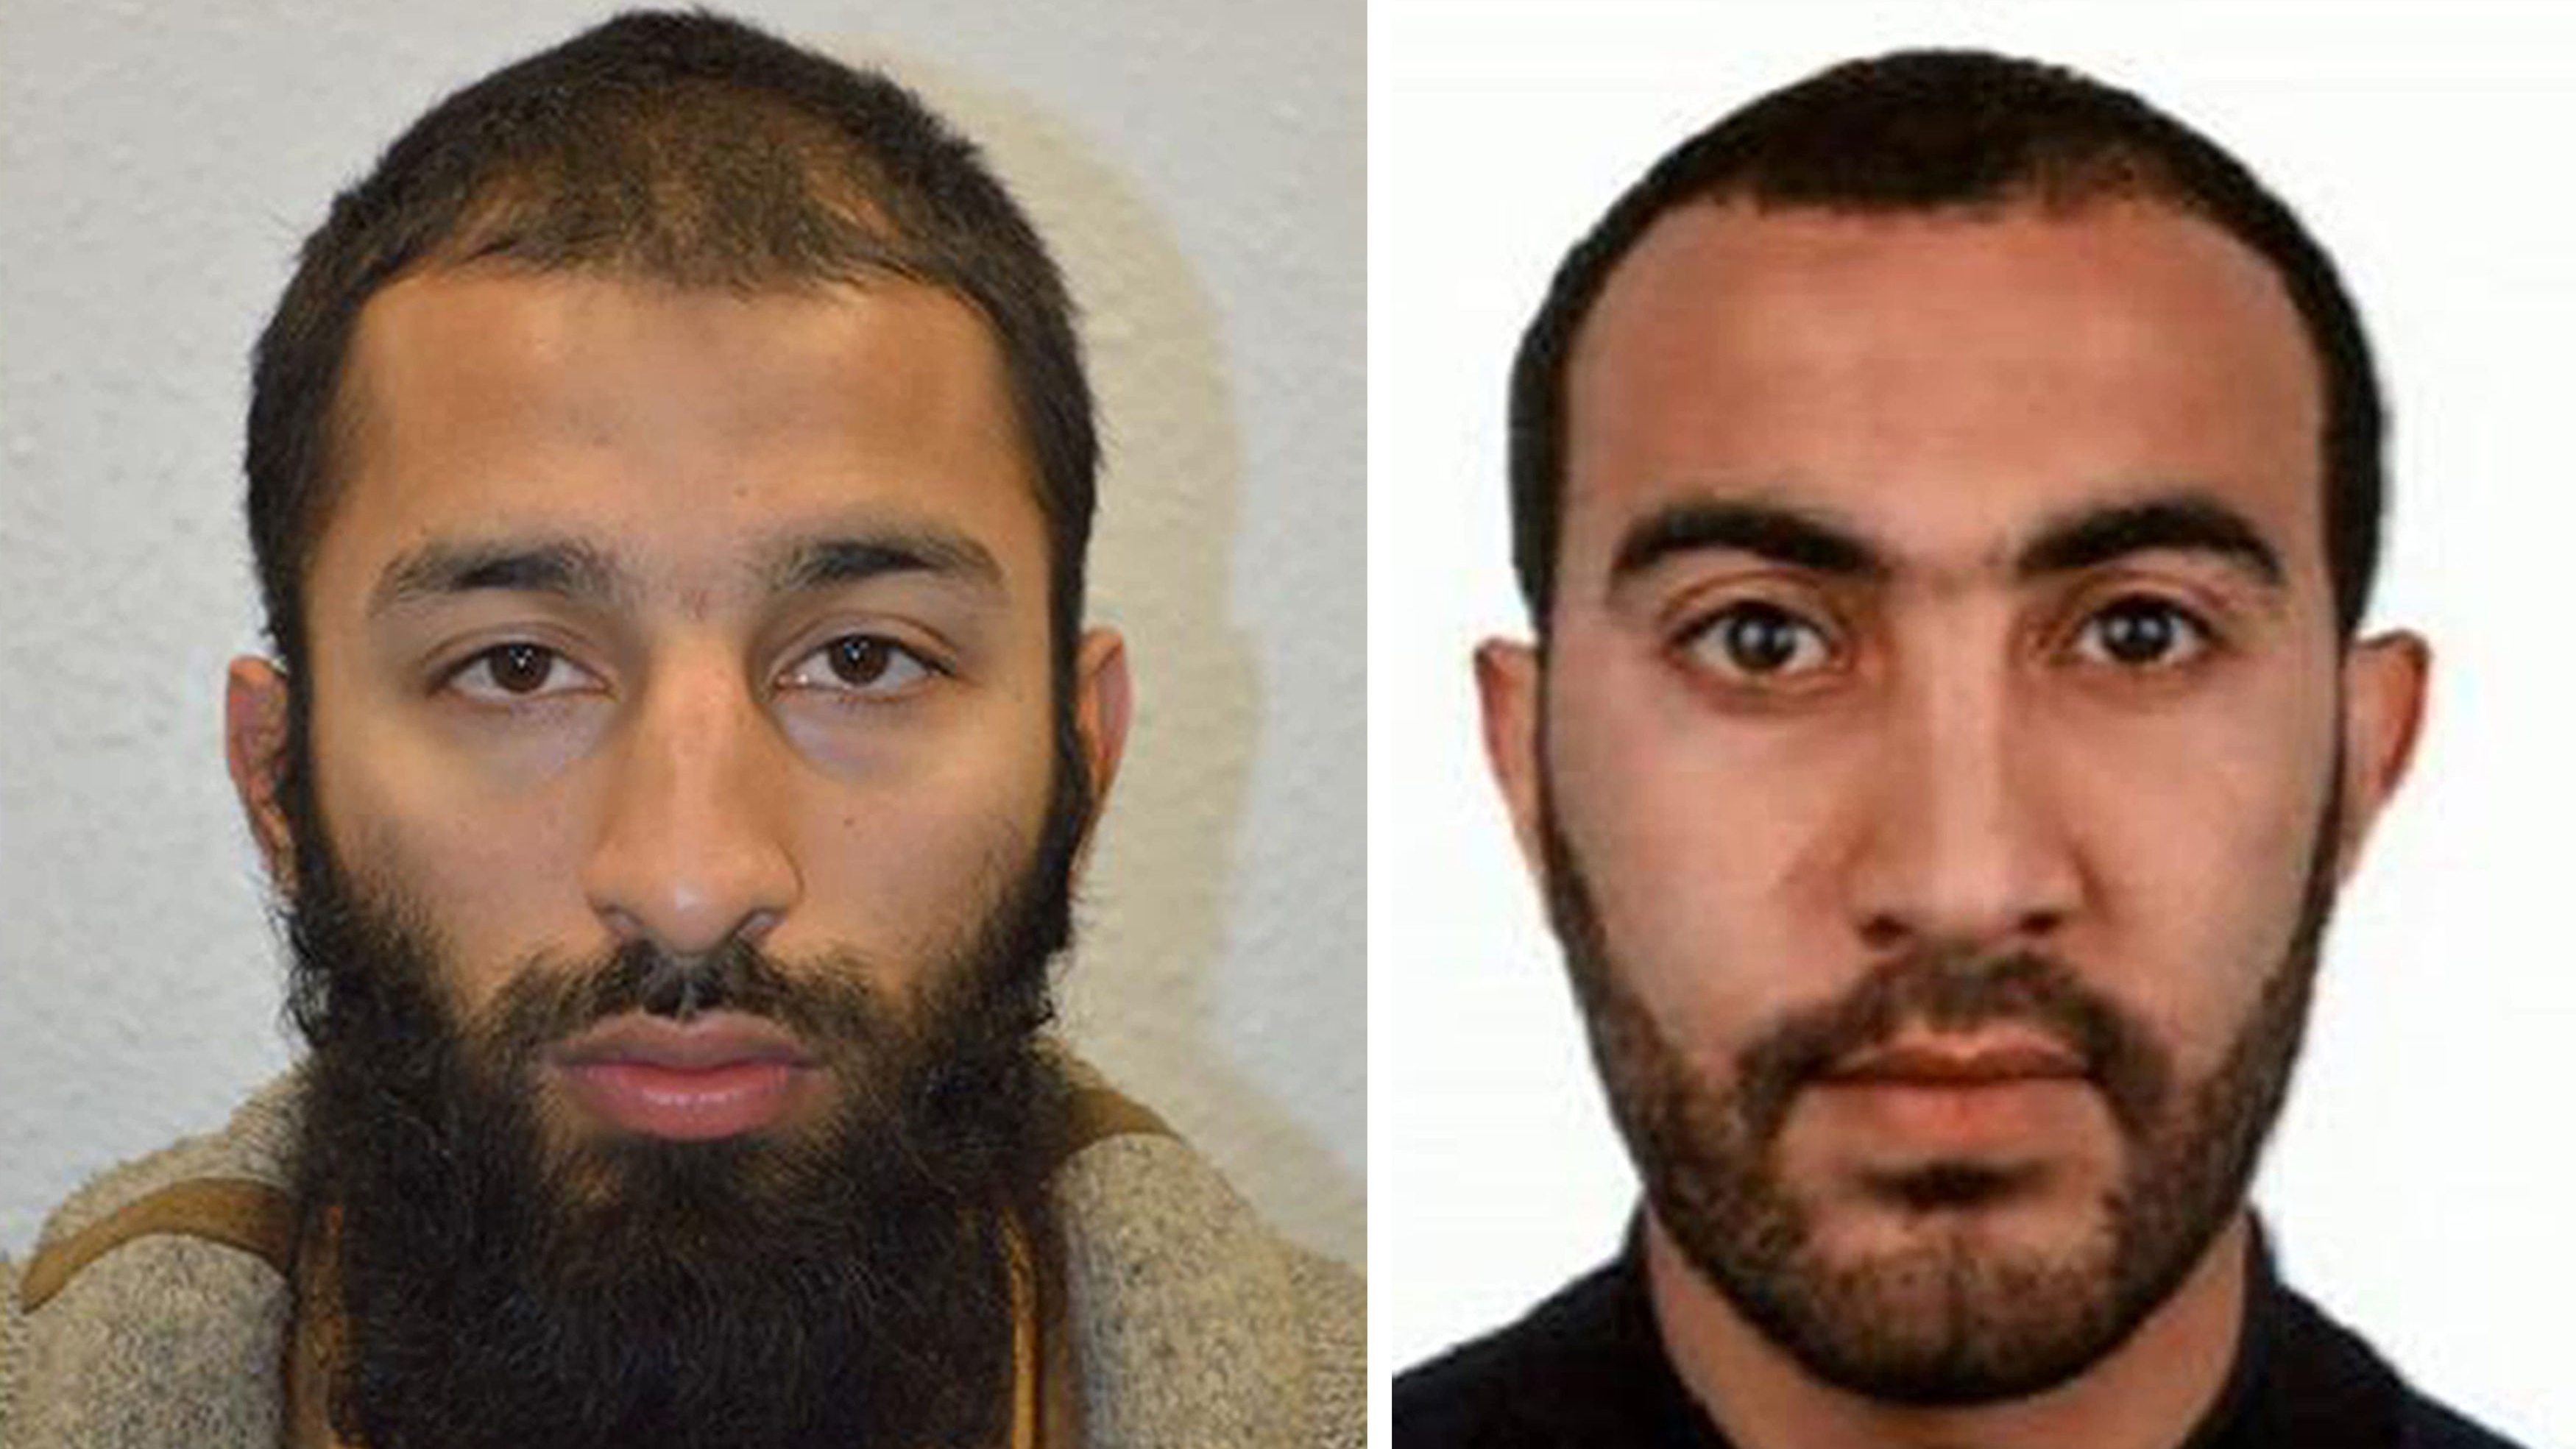 Khuram Shazad Butt (left) and Rachid Redouane who have been named as two of the men shot dead by police following the terrorist attack on London Bridge and Borough Market (Metropolitan Police/PA)